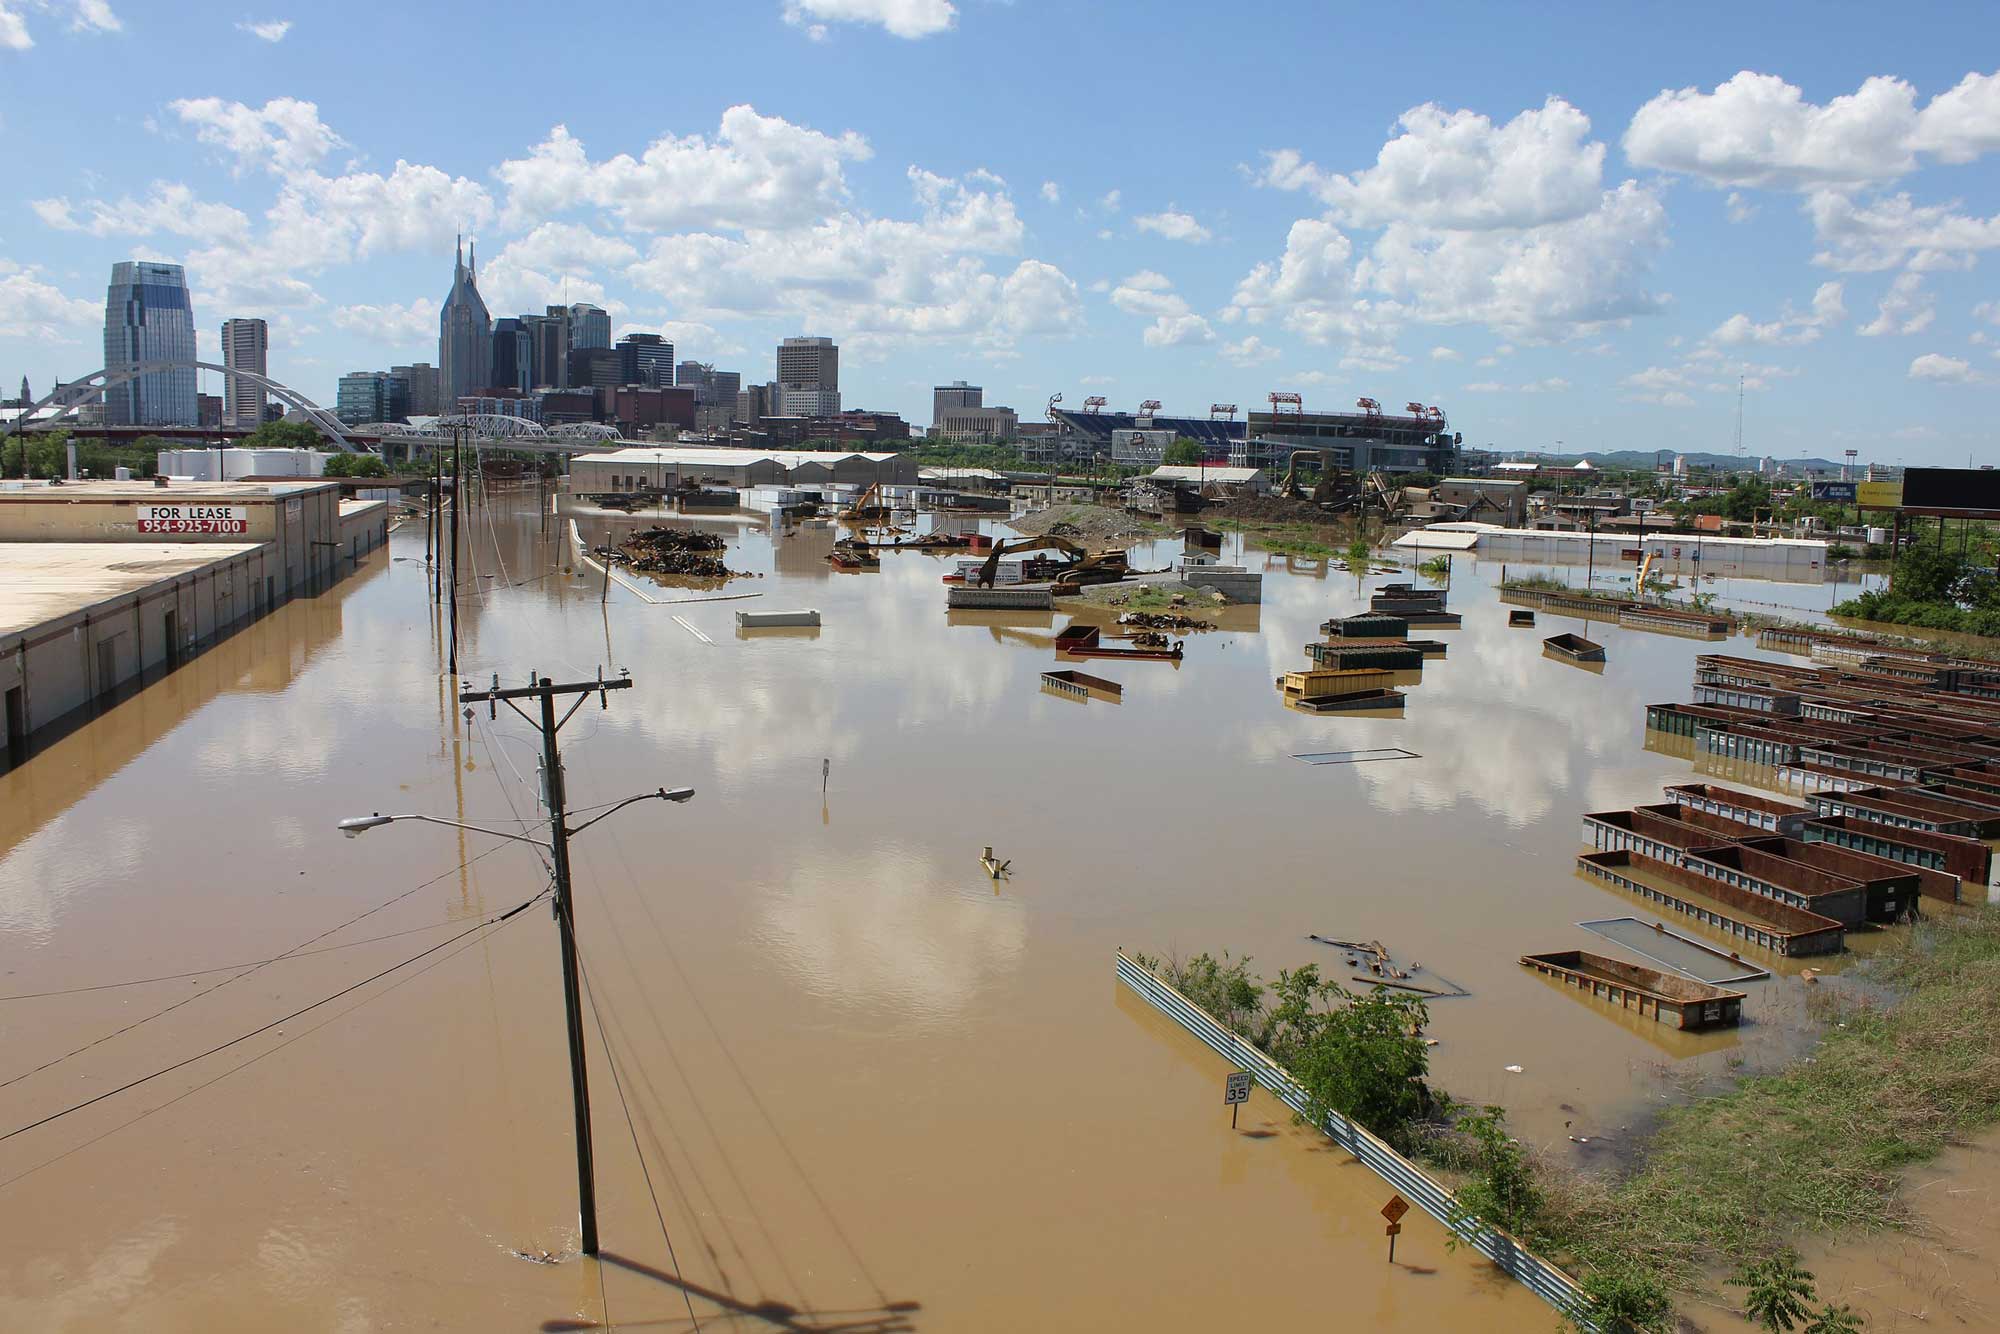 Photograph showing flooding in downtown Nashville, Tennessee in 2010.